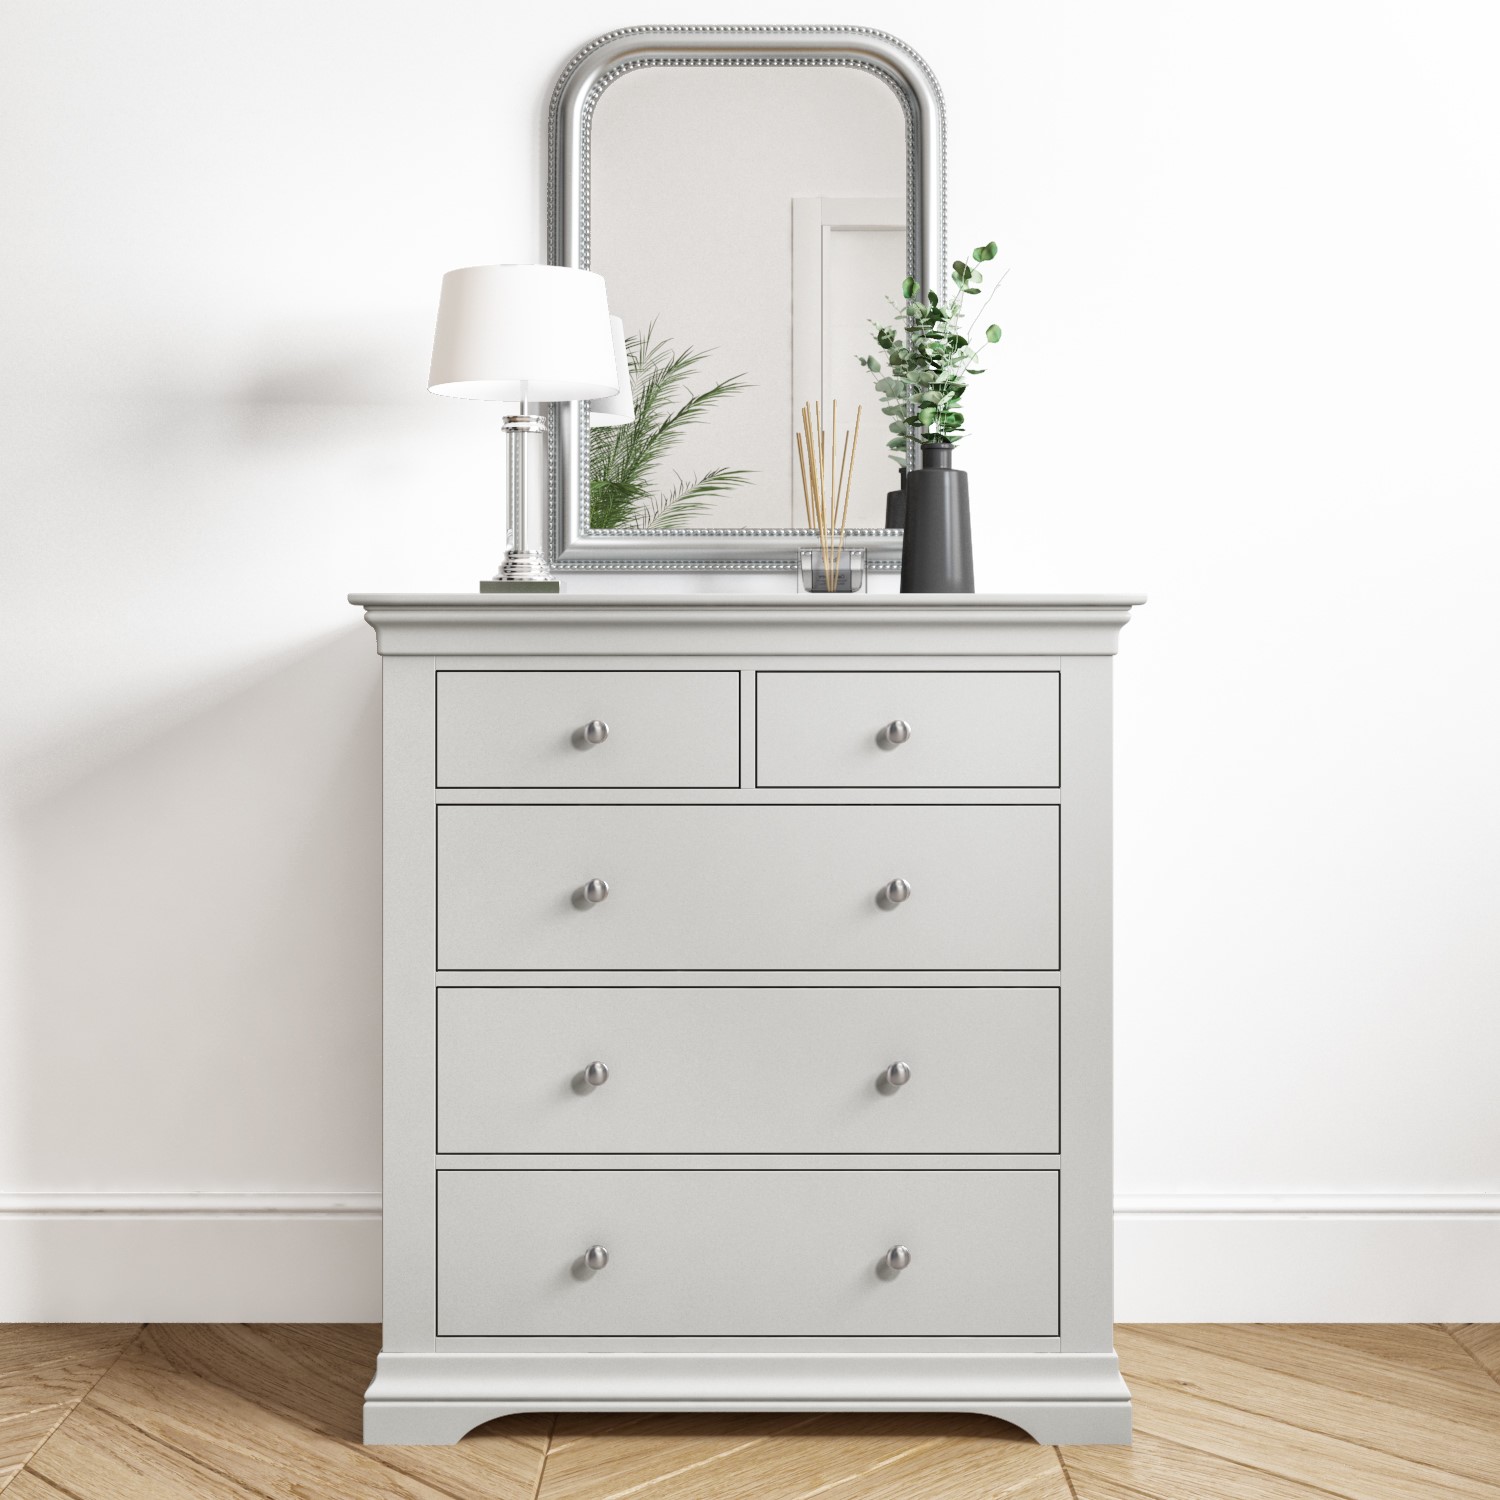 Photo of Pale grey 3 + 2 drawer chest of drawers - olivia